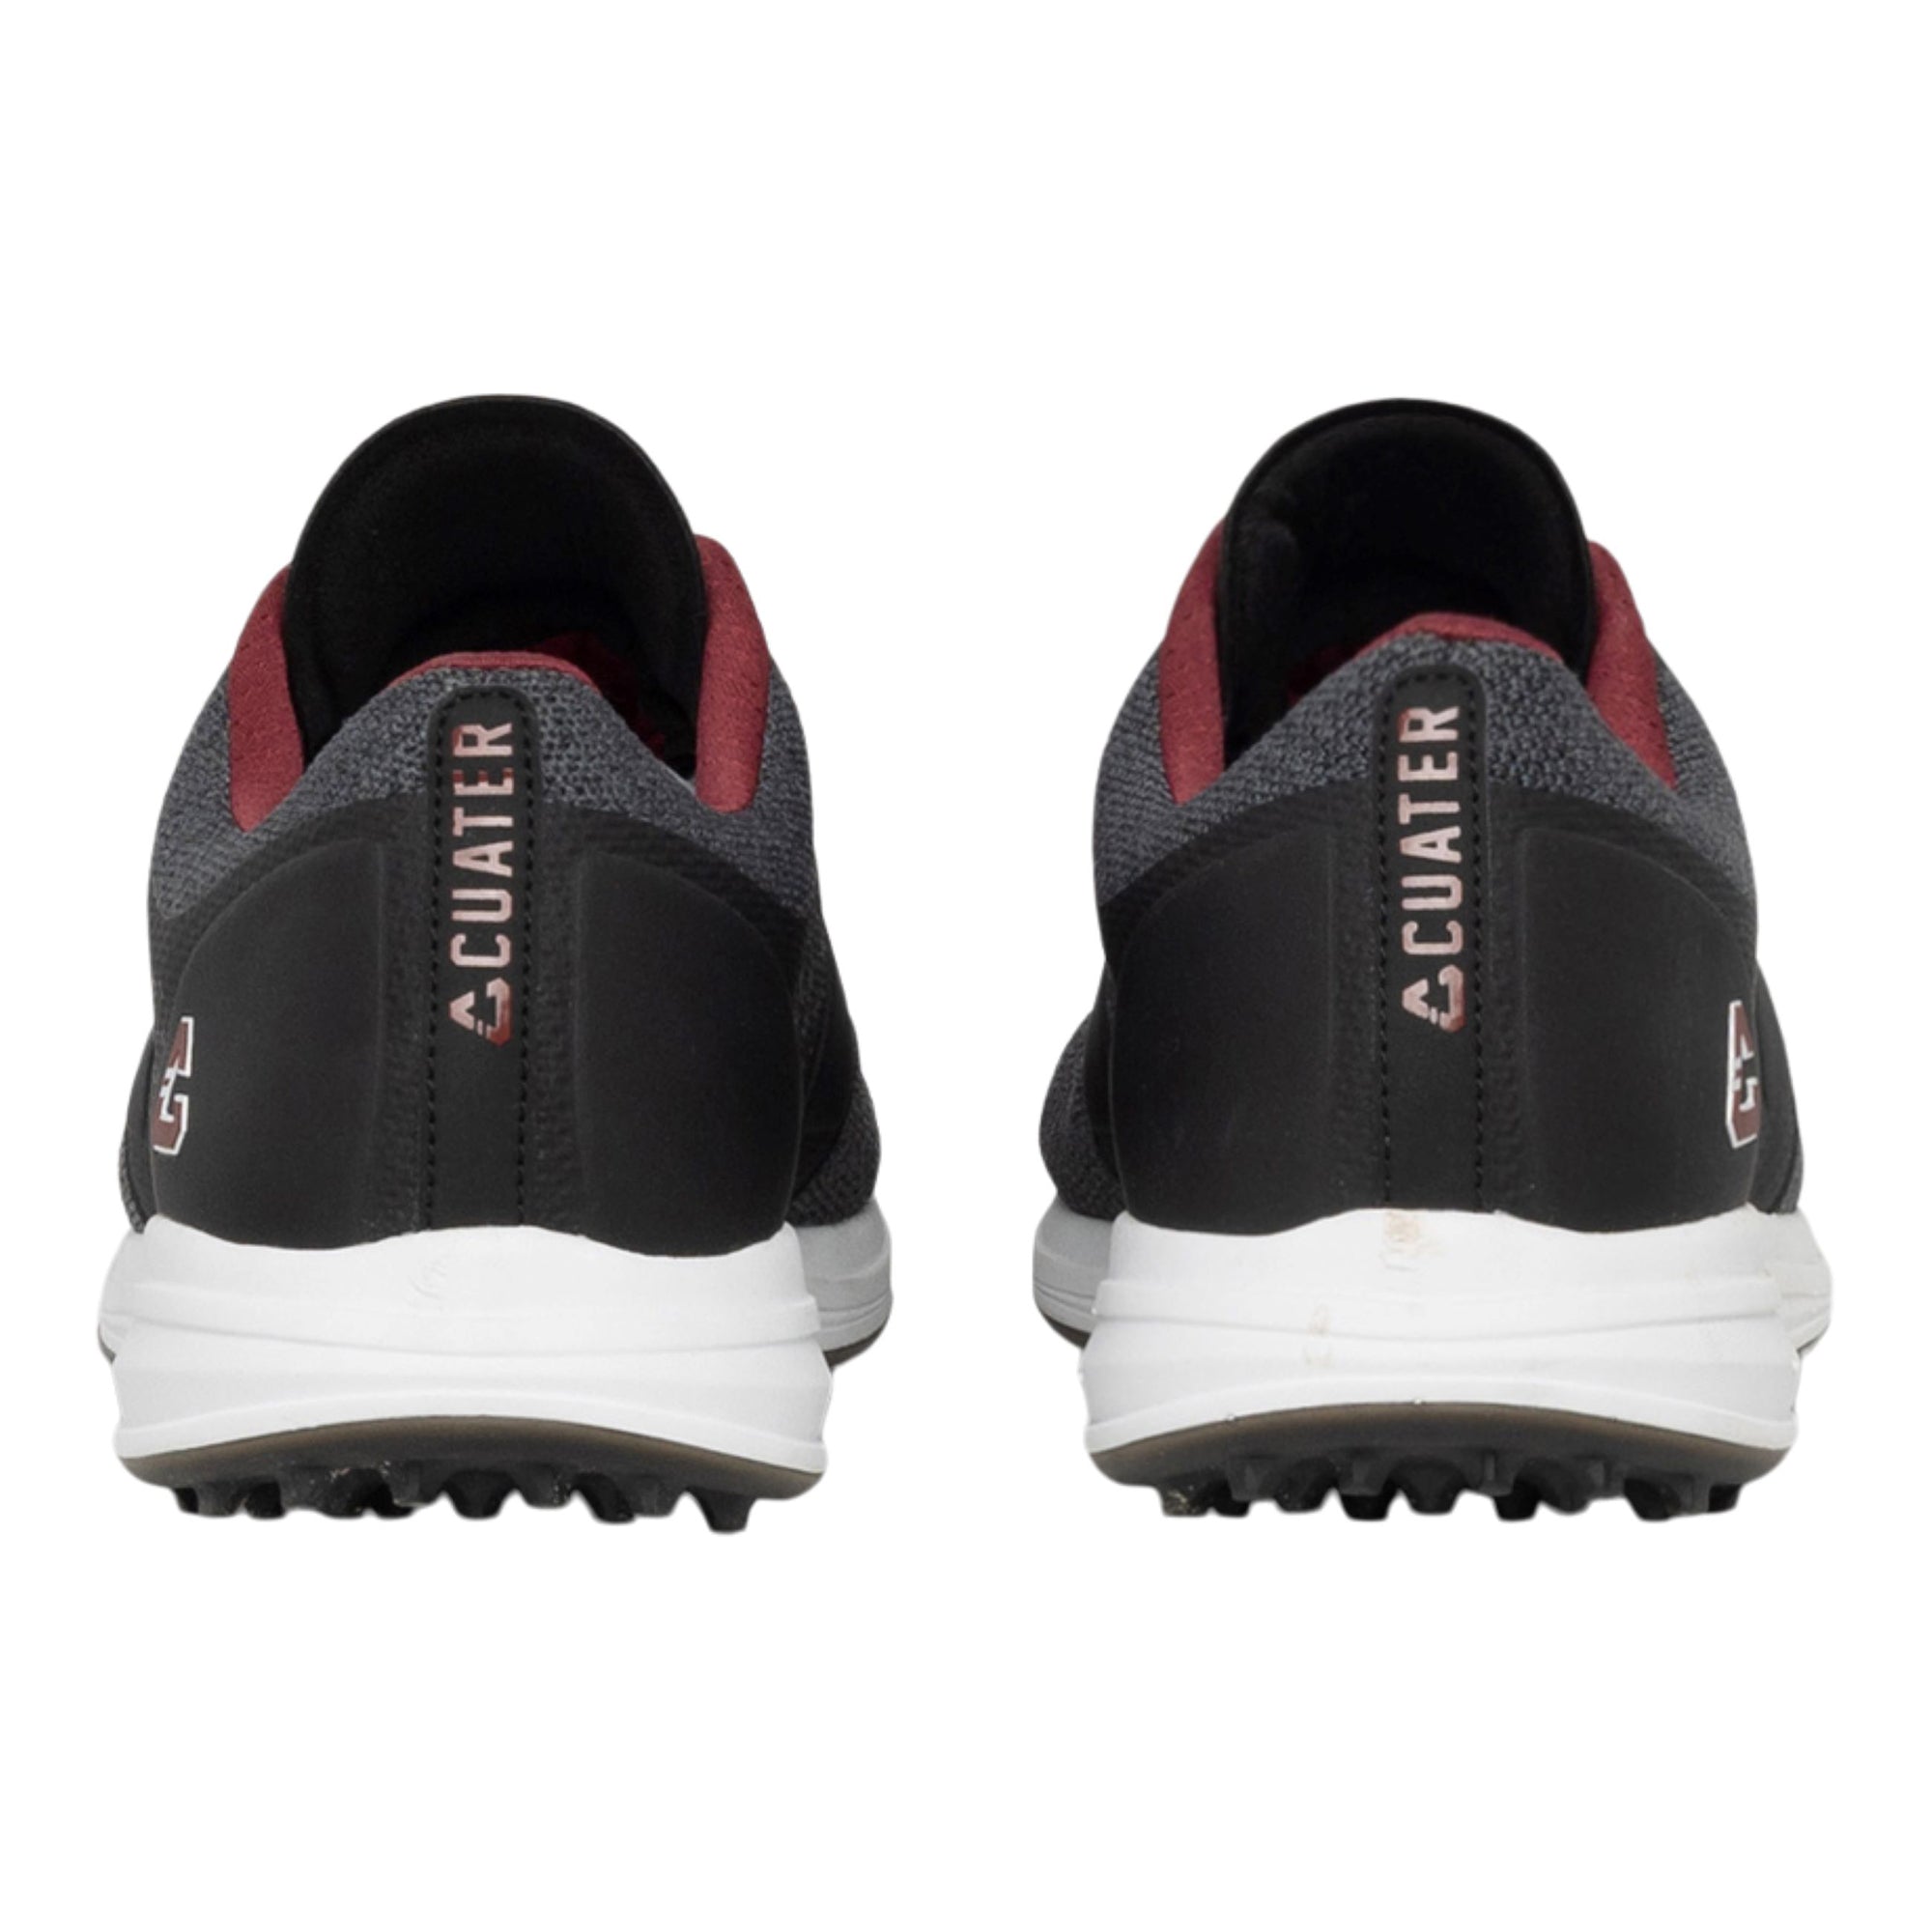 cuater-the-money-maker-golf-shoes-4mr216-black-ruby-wine-function18